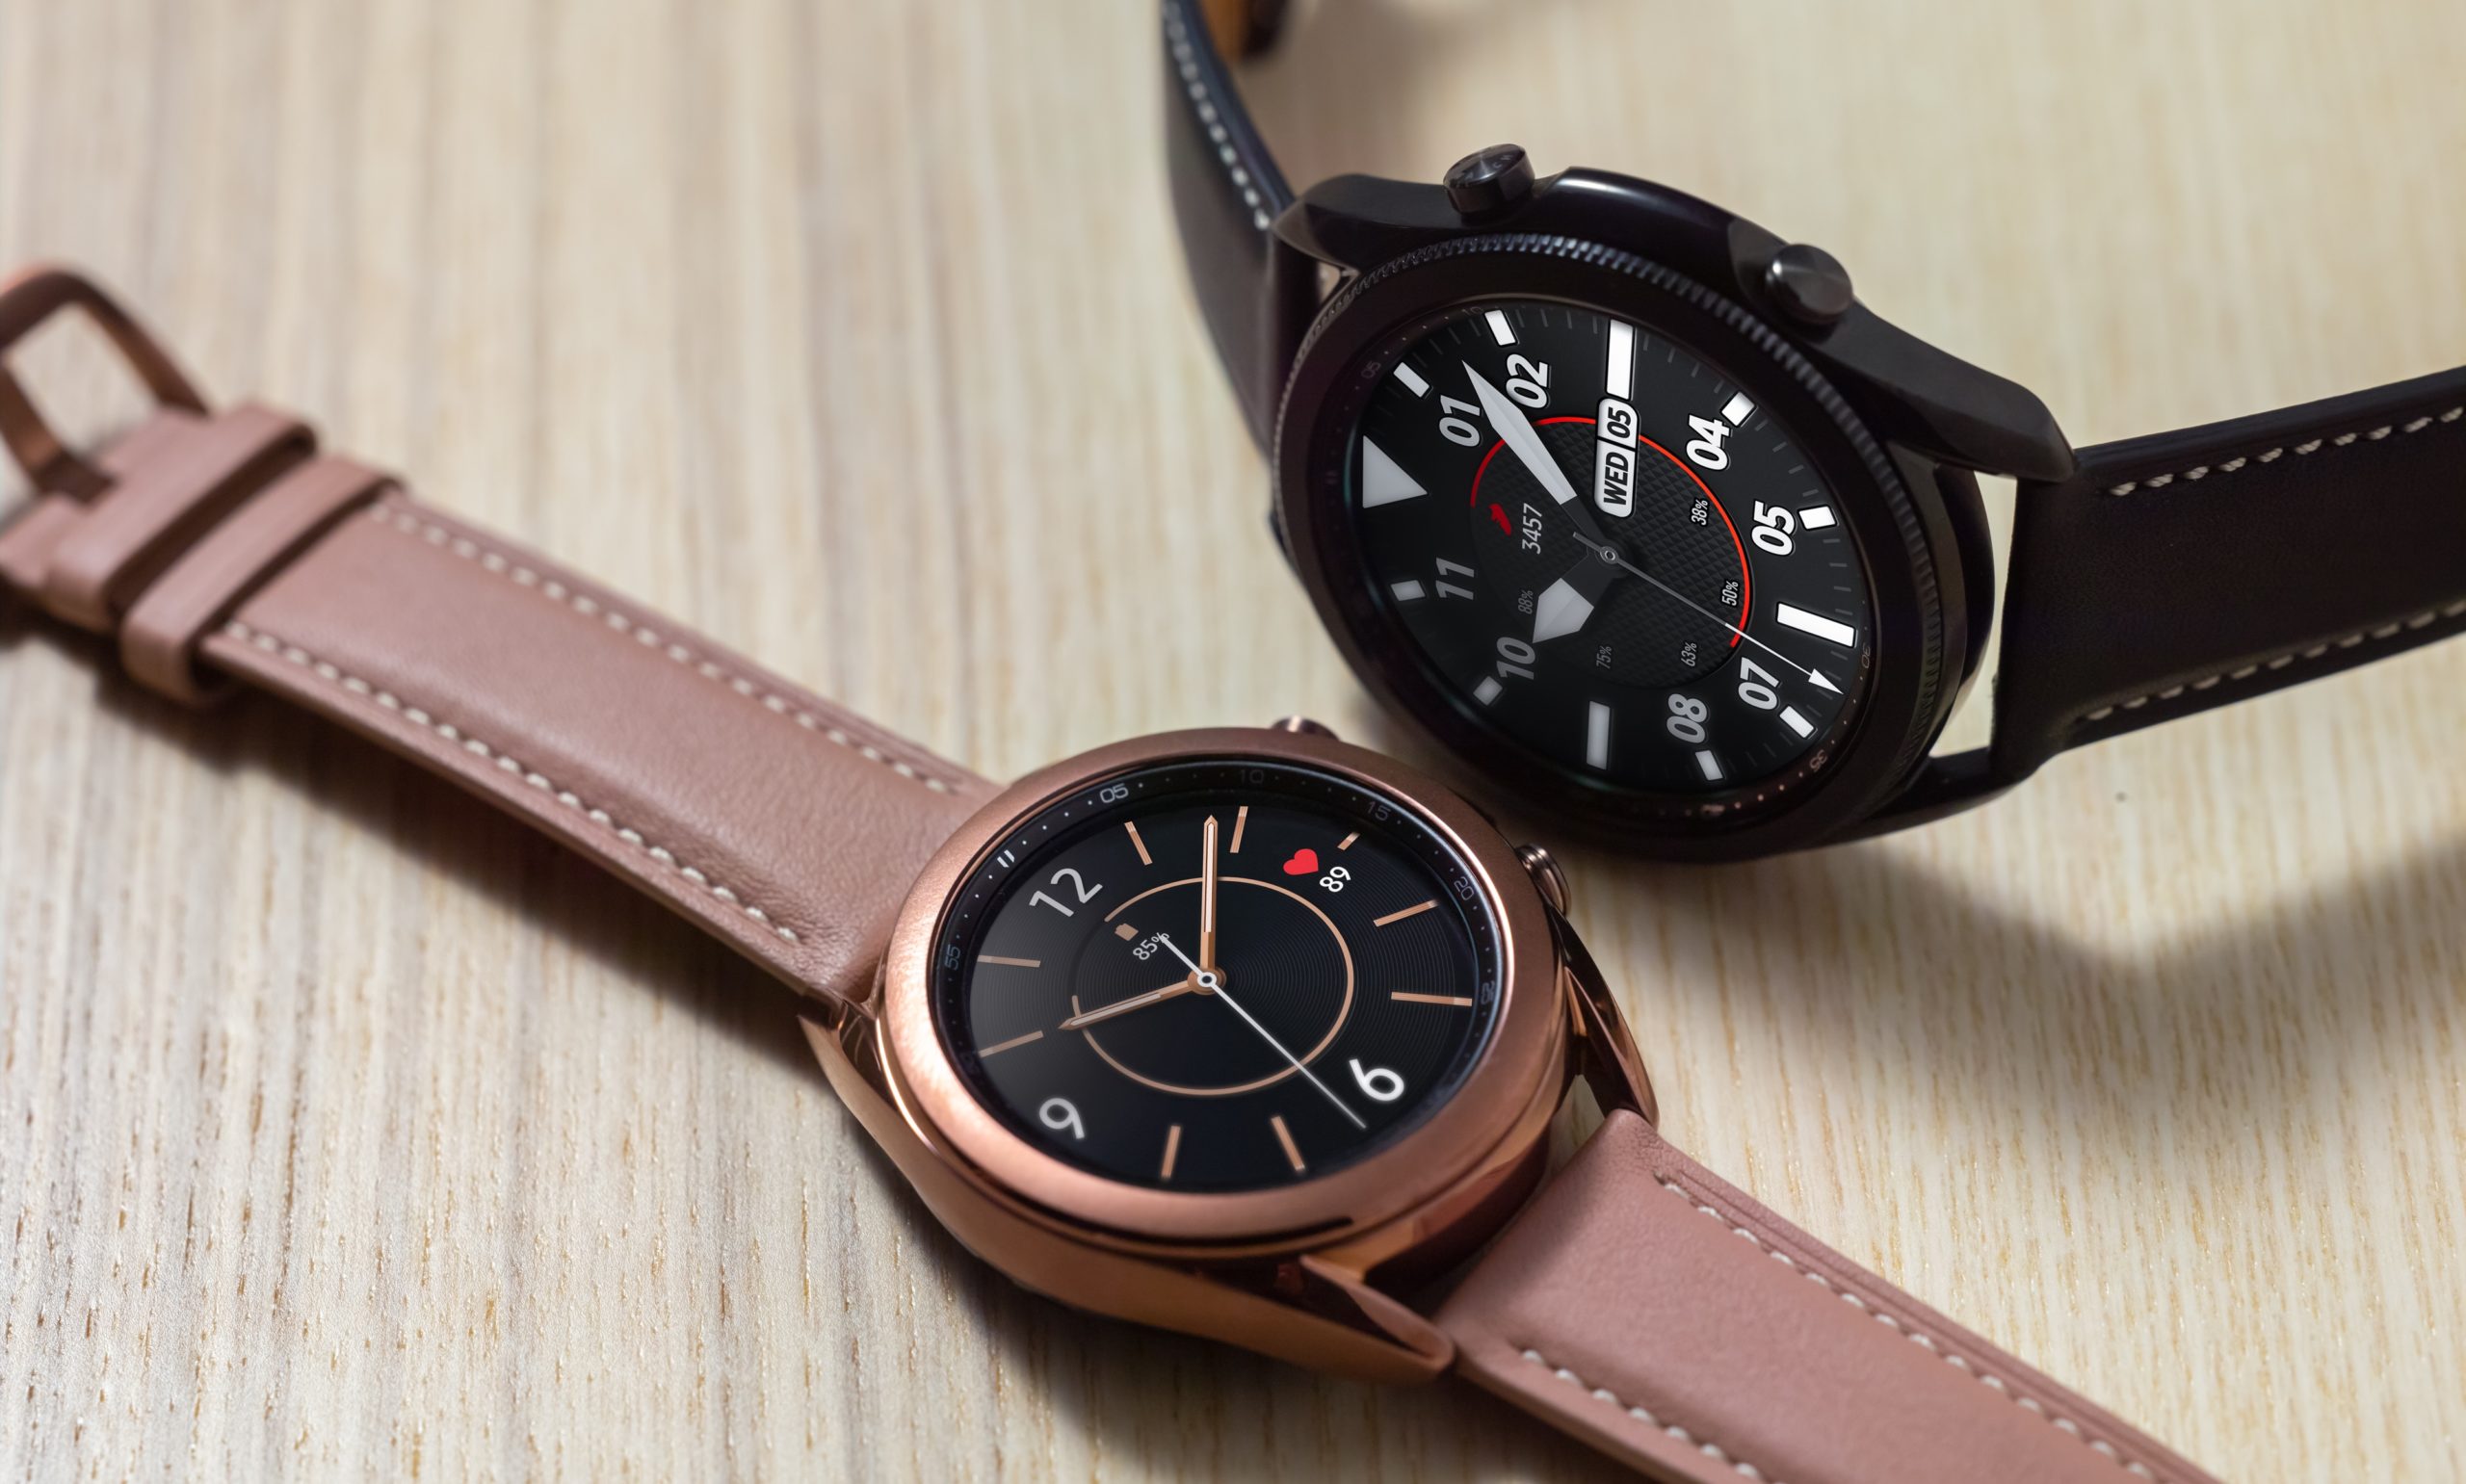 Samsung Galaxy Watch 3 Lifestile Two Color Variants Scaled